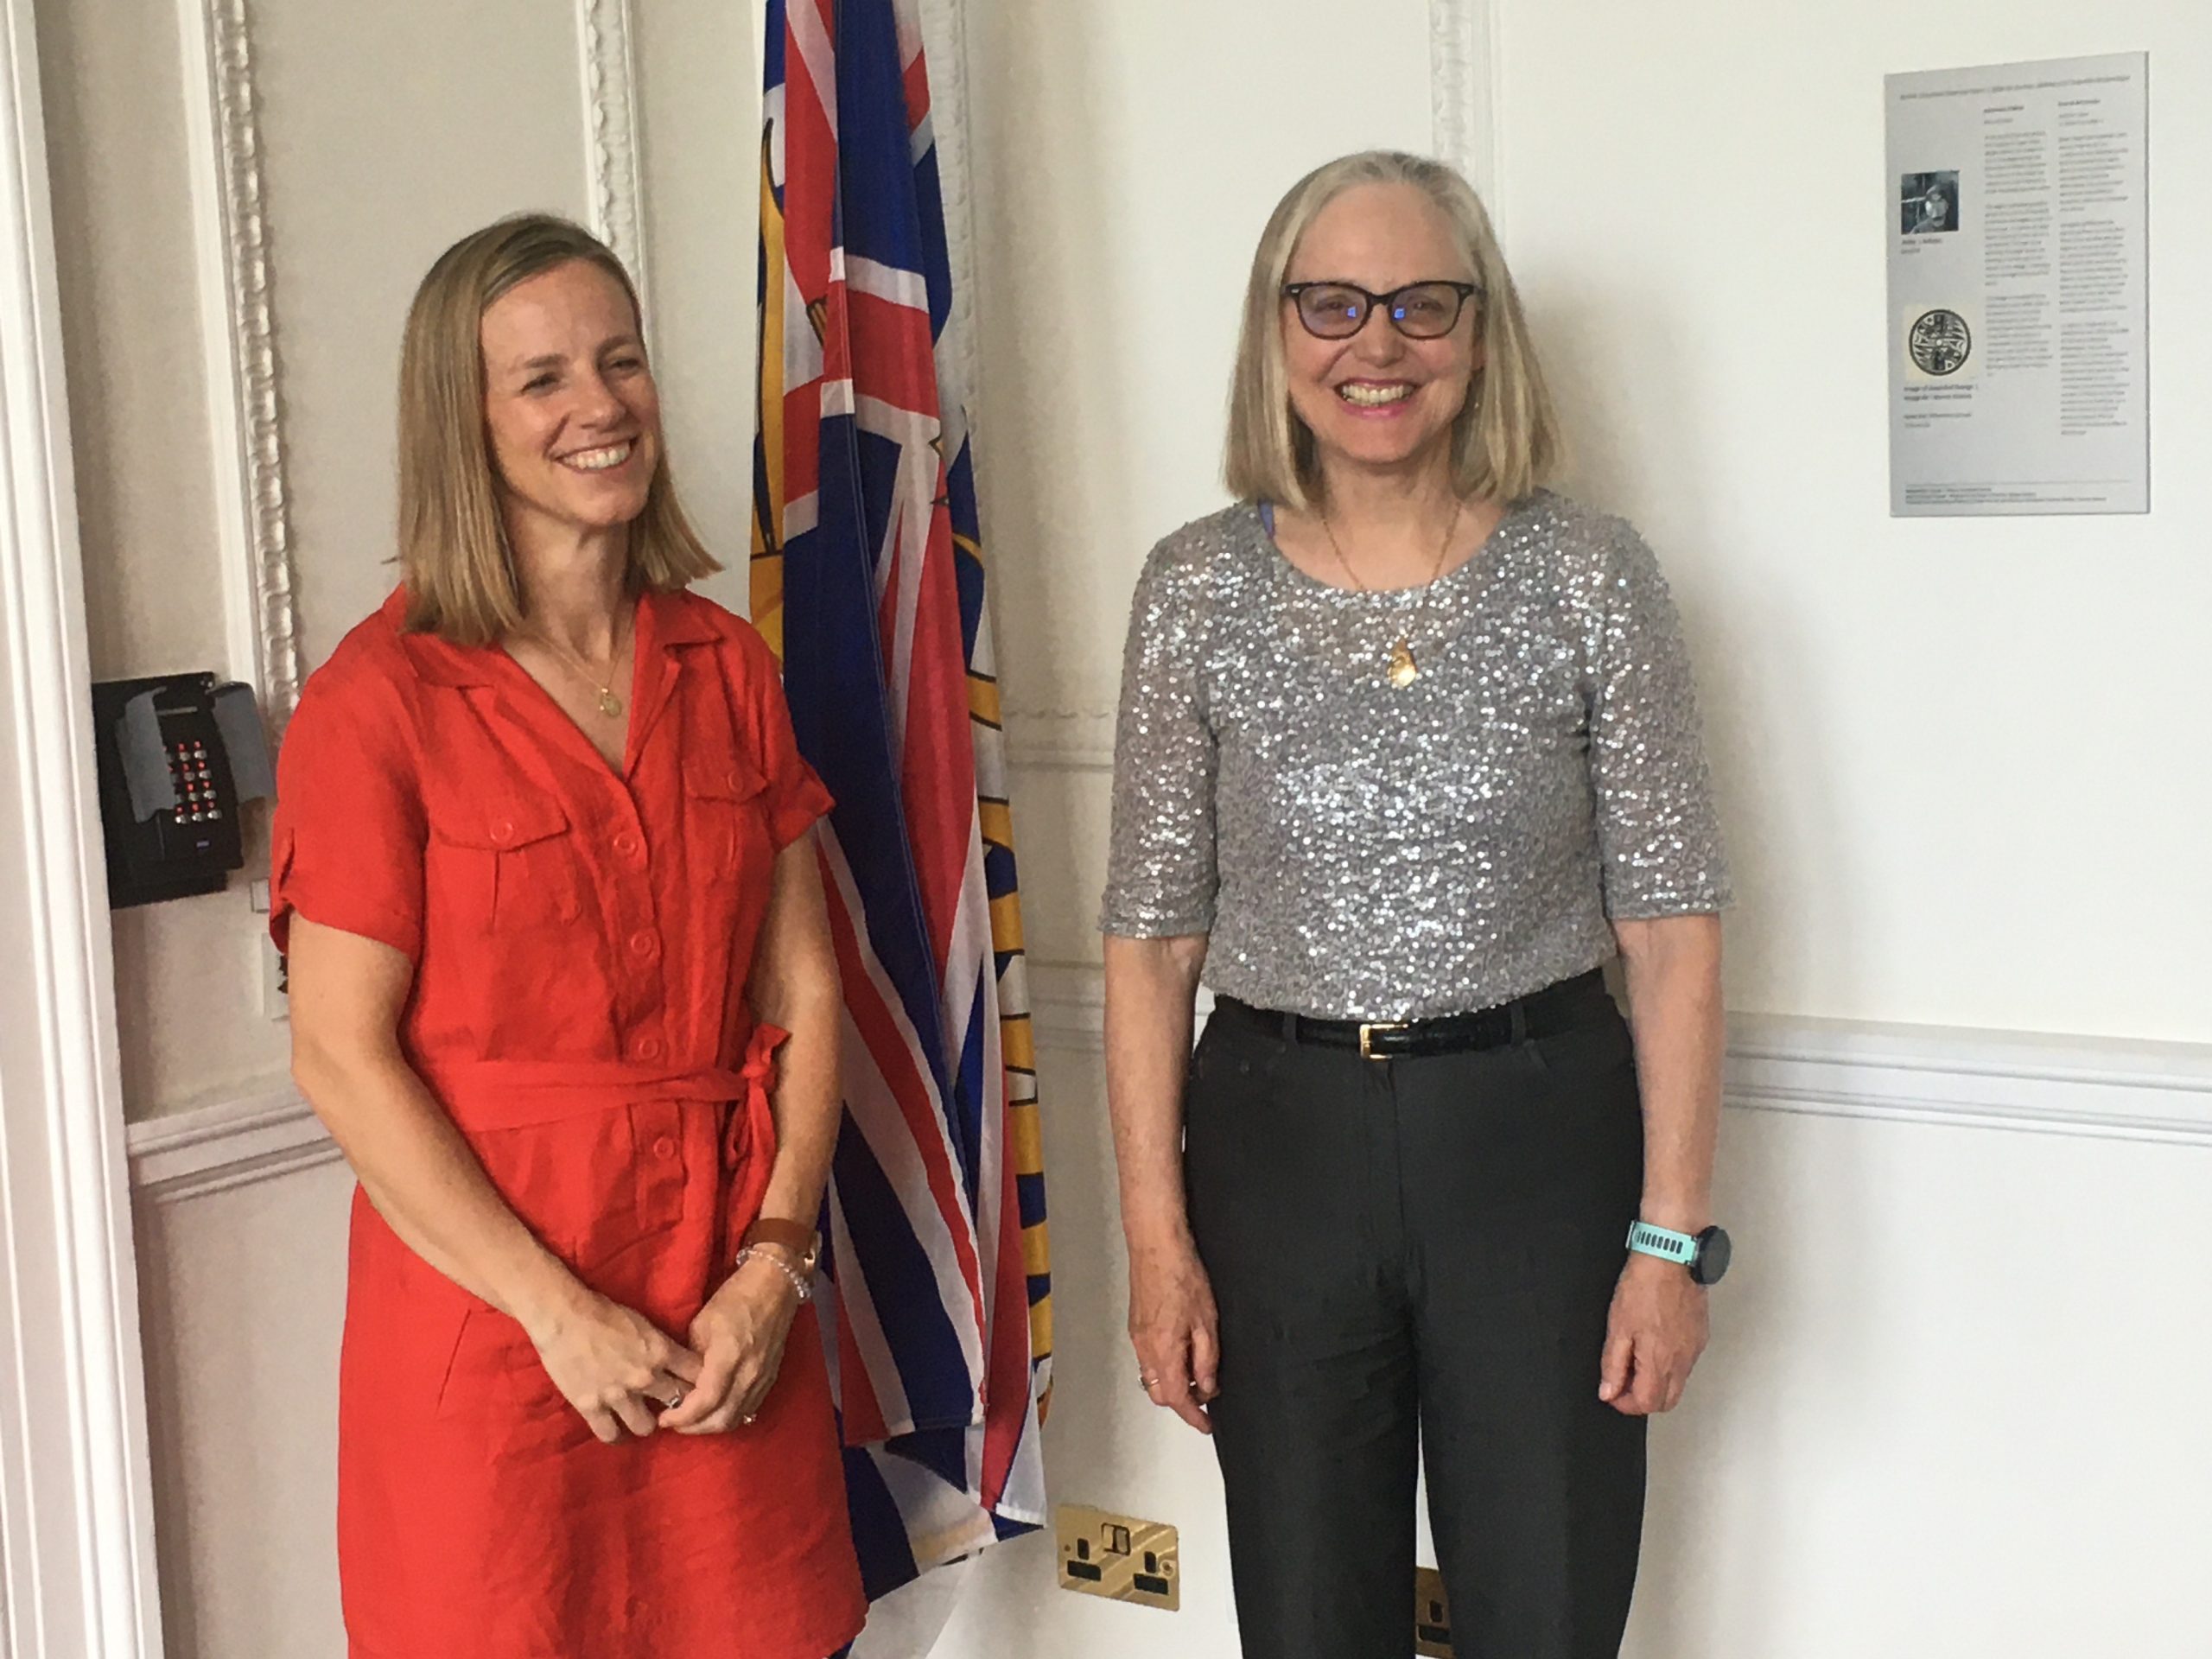 Fiona Macleod at the Canadian High Commission in London